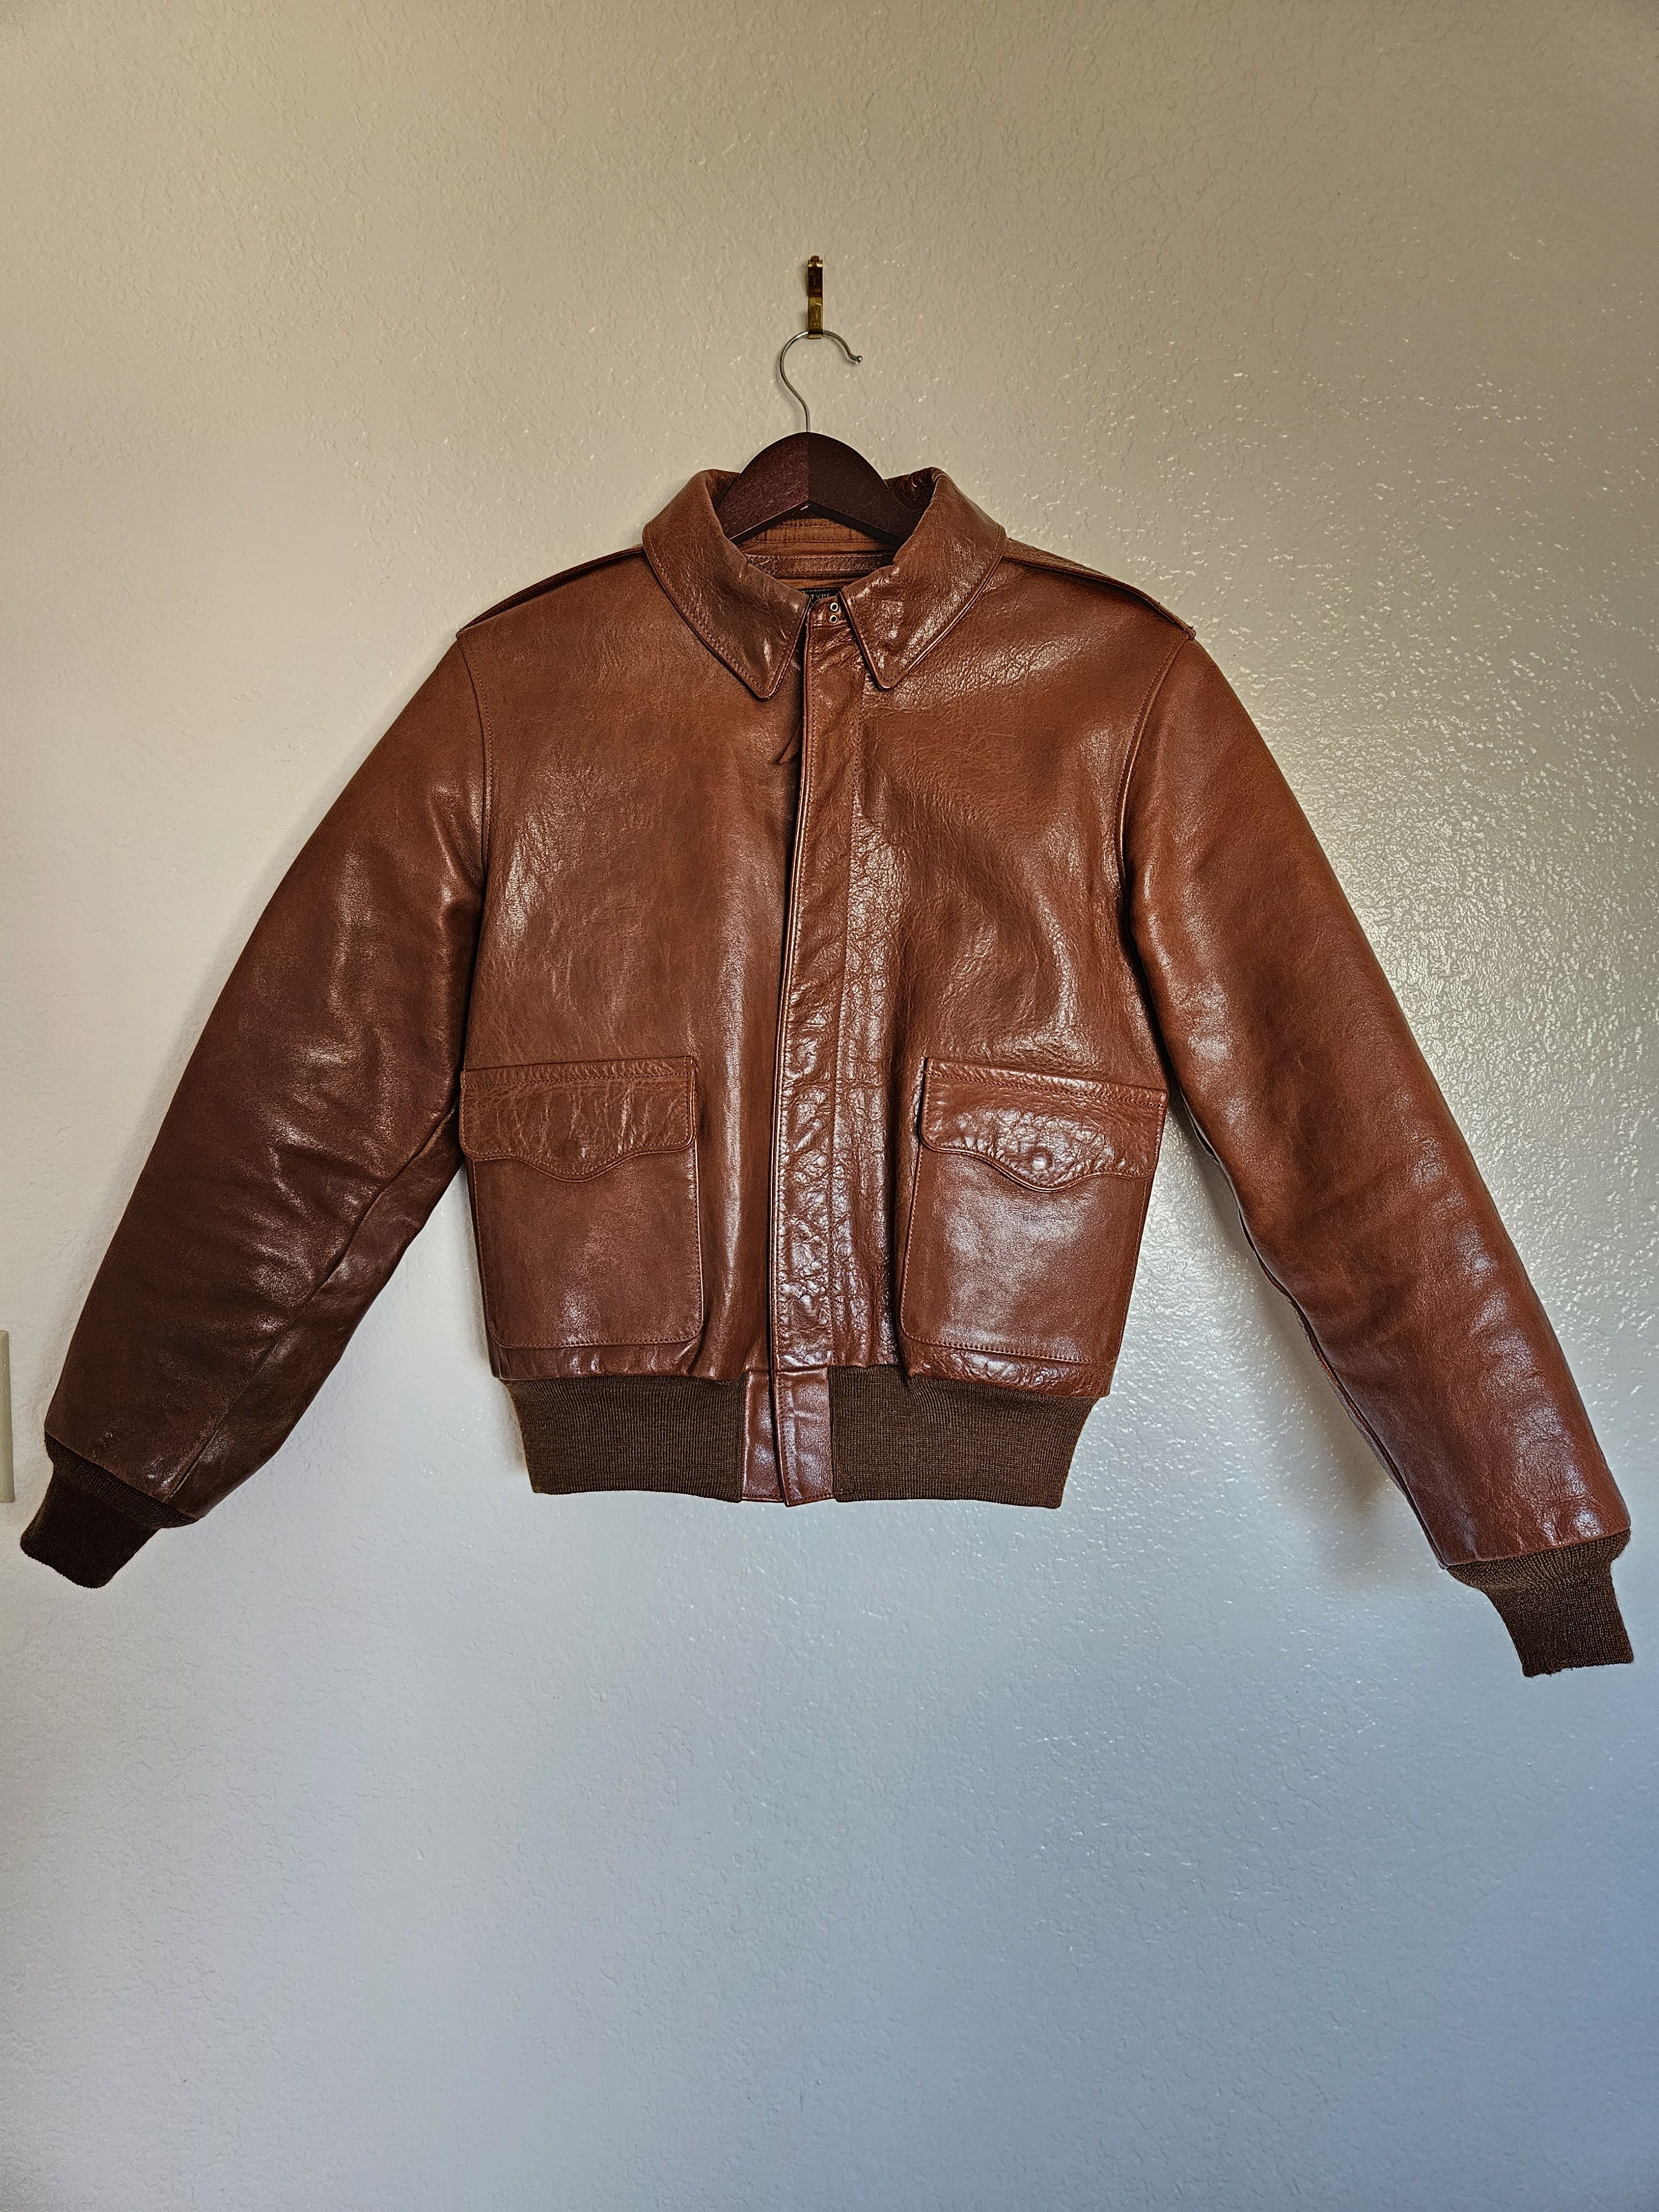 The Real McCoy's A-2 Jacket Russet Horsehide Size US S / EU 44-46 / 1 - 1 Preview